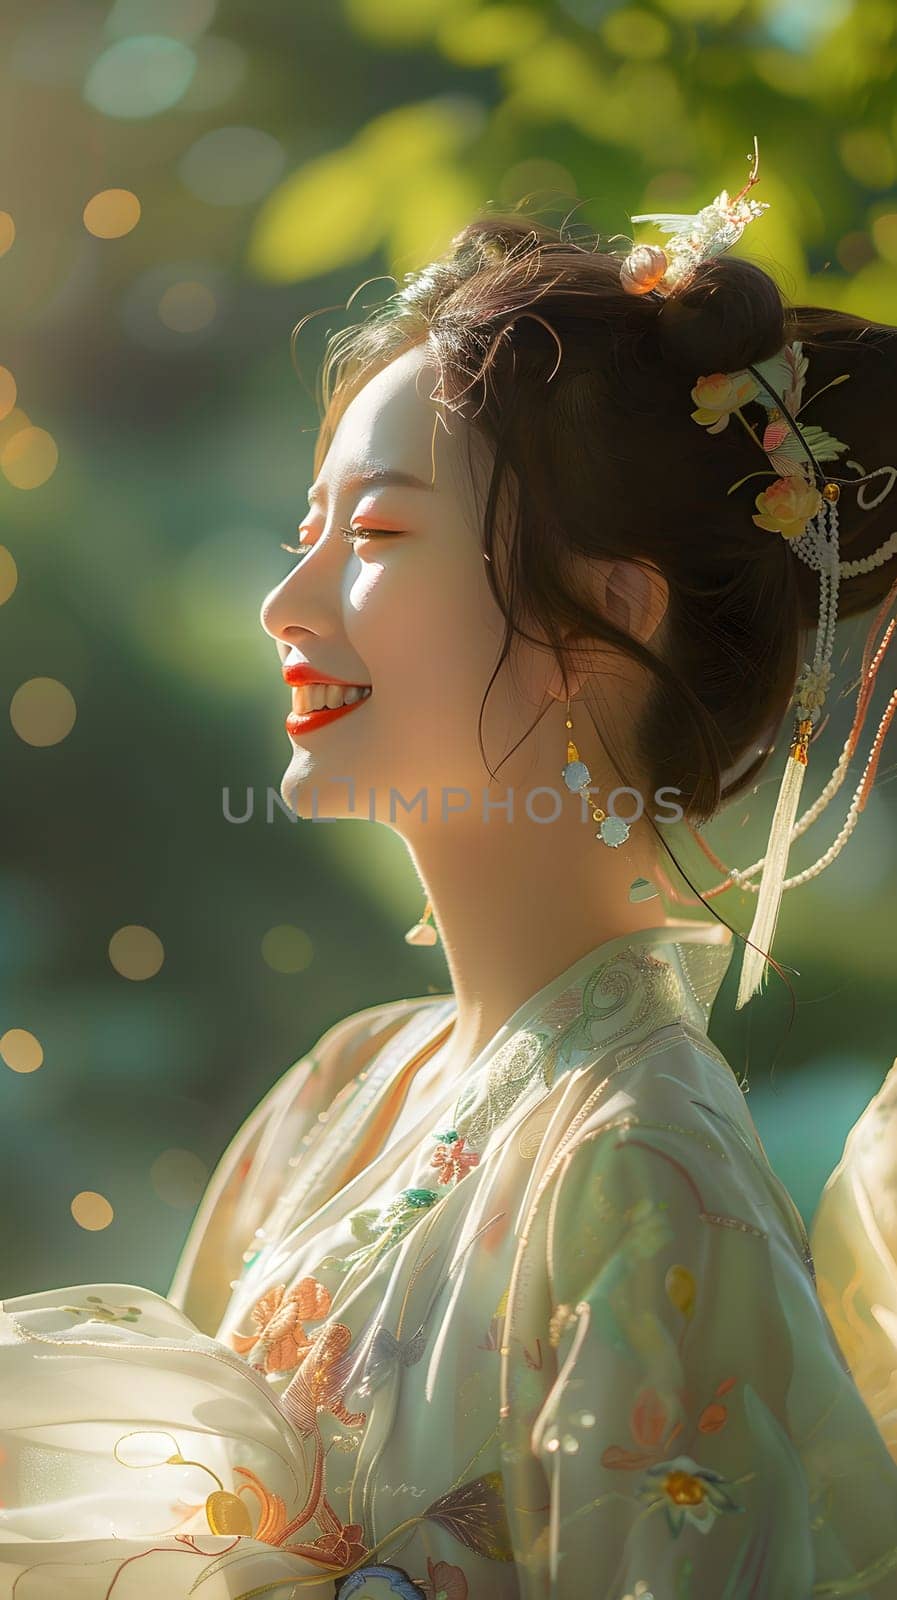 a woman in a kimono is smiling and holding a fan by Nadtochiy